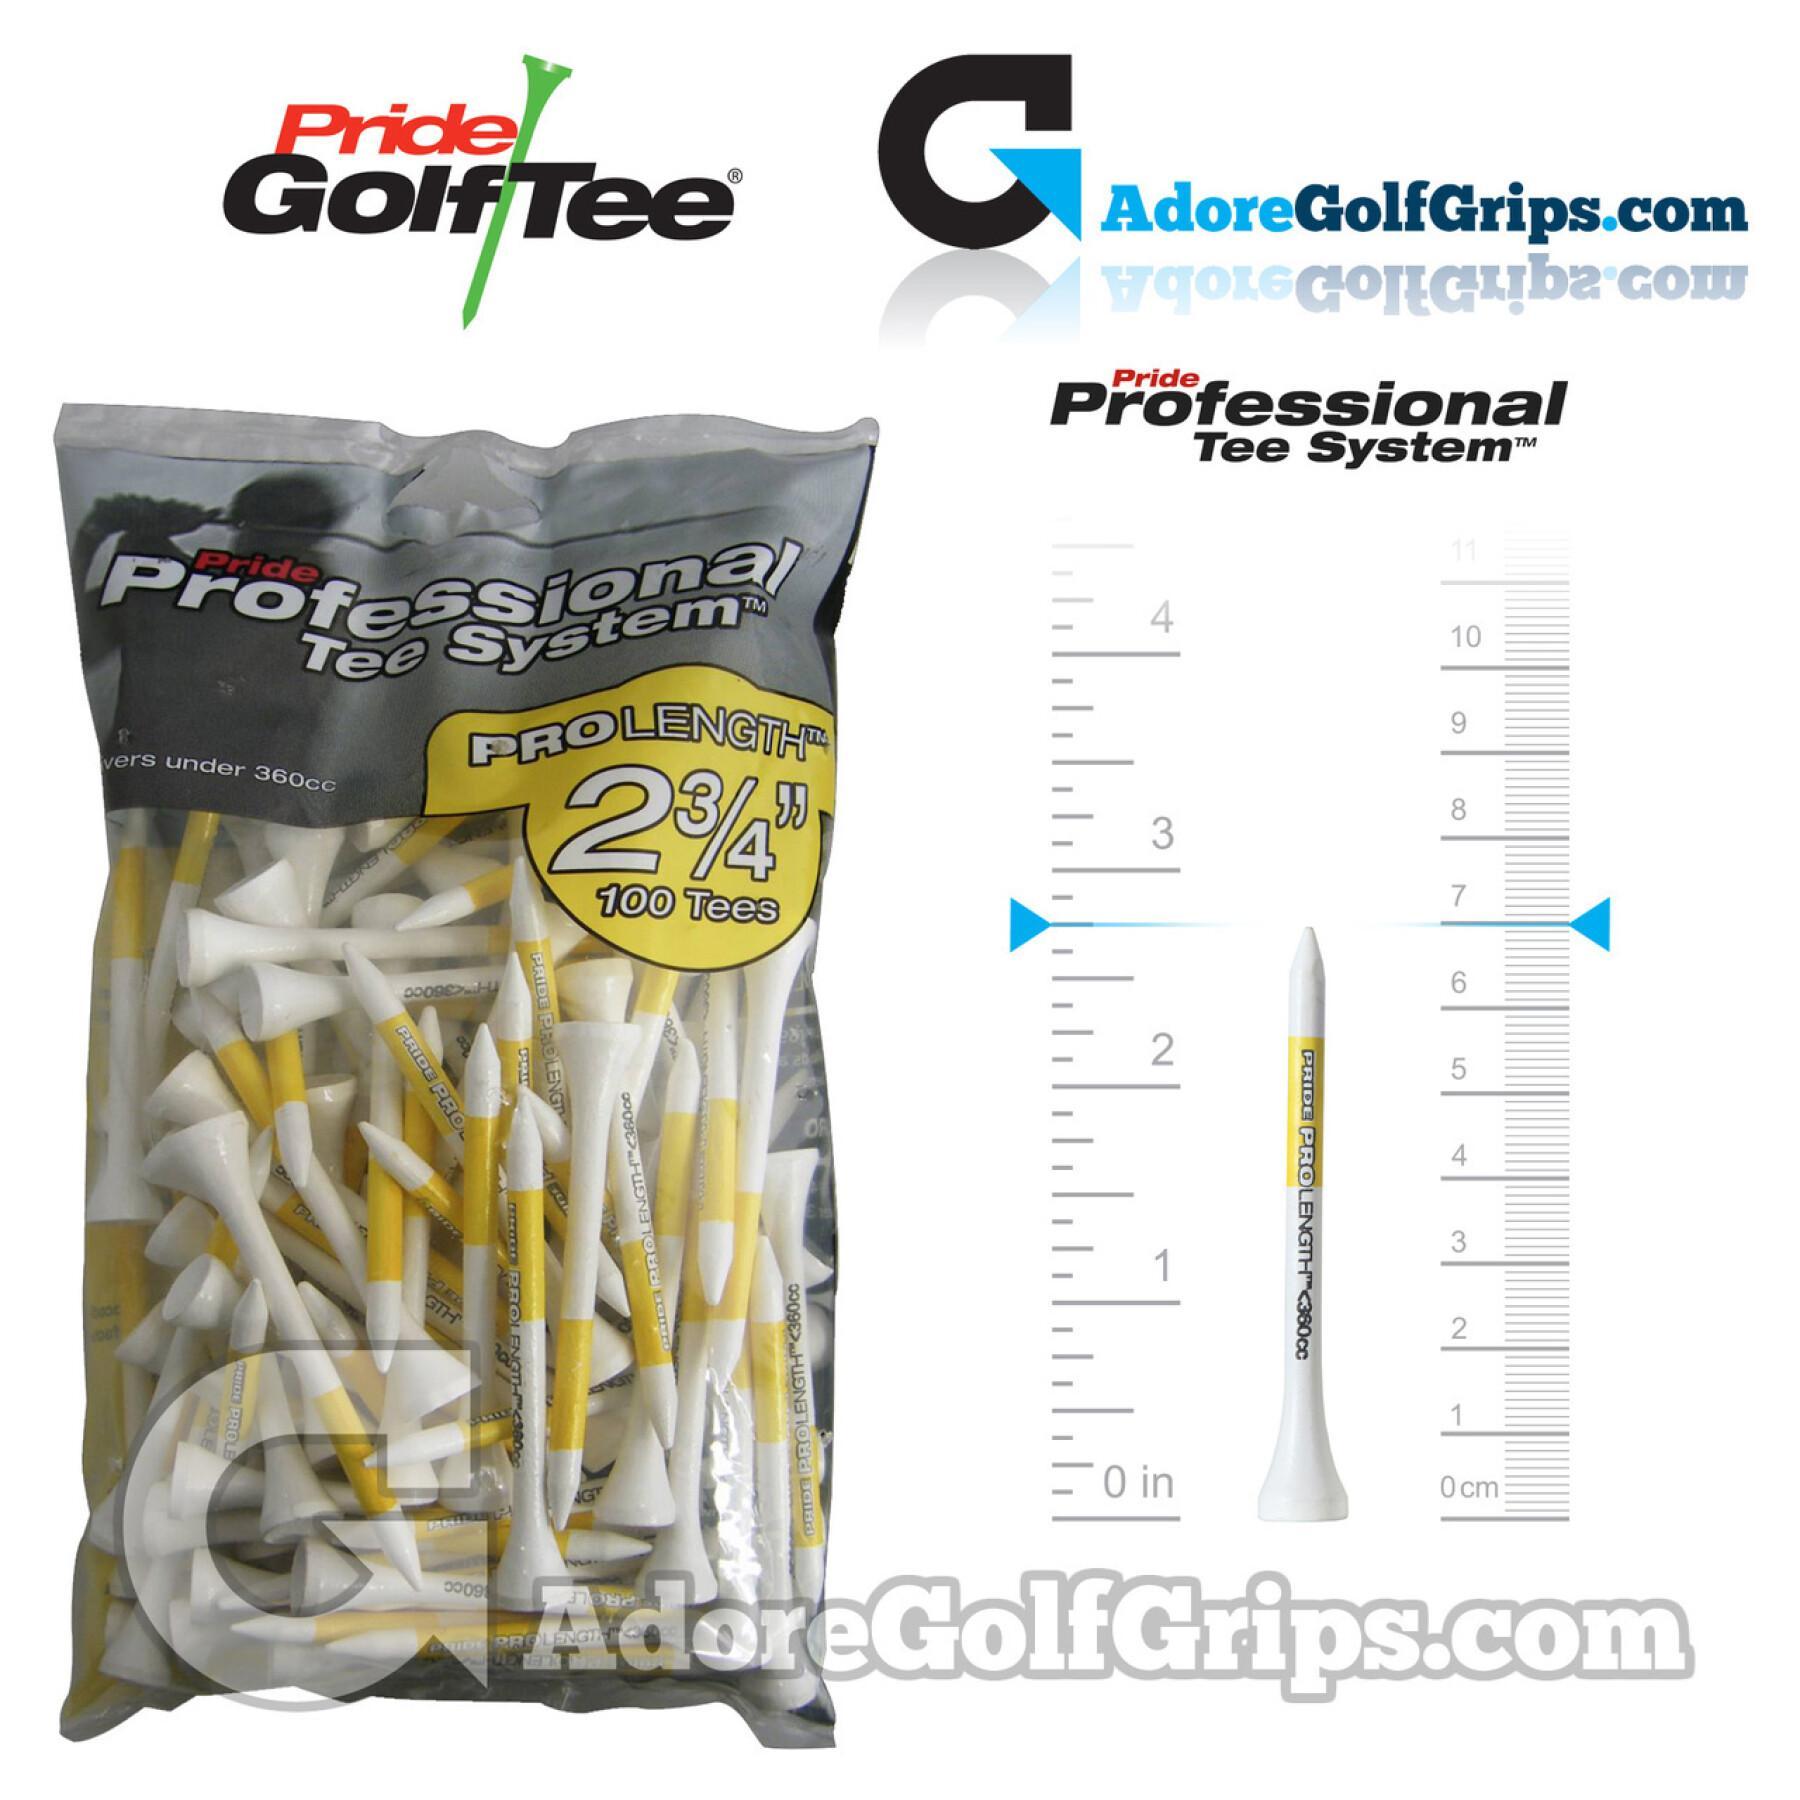 Tees Pride Golf Tee professionnal system offset 2 3/4